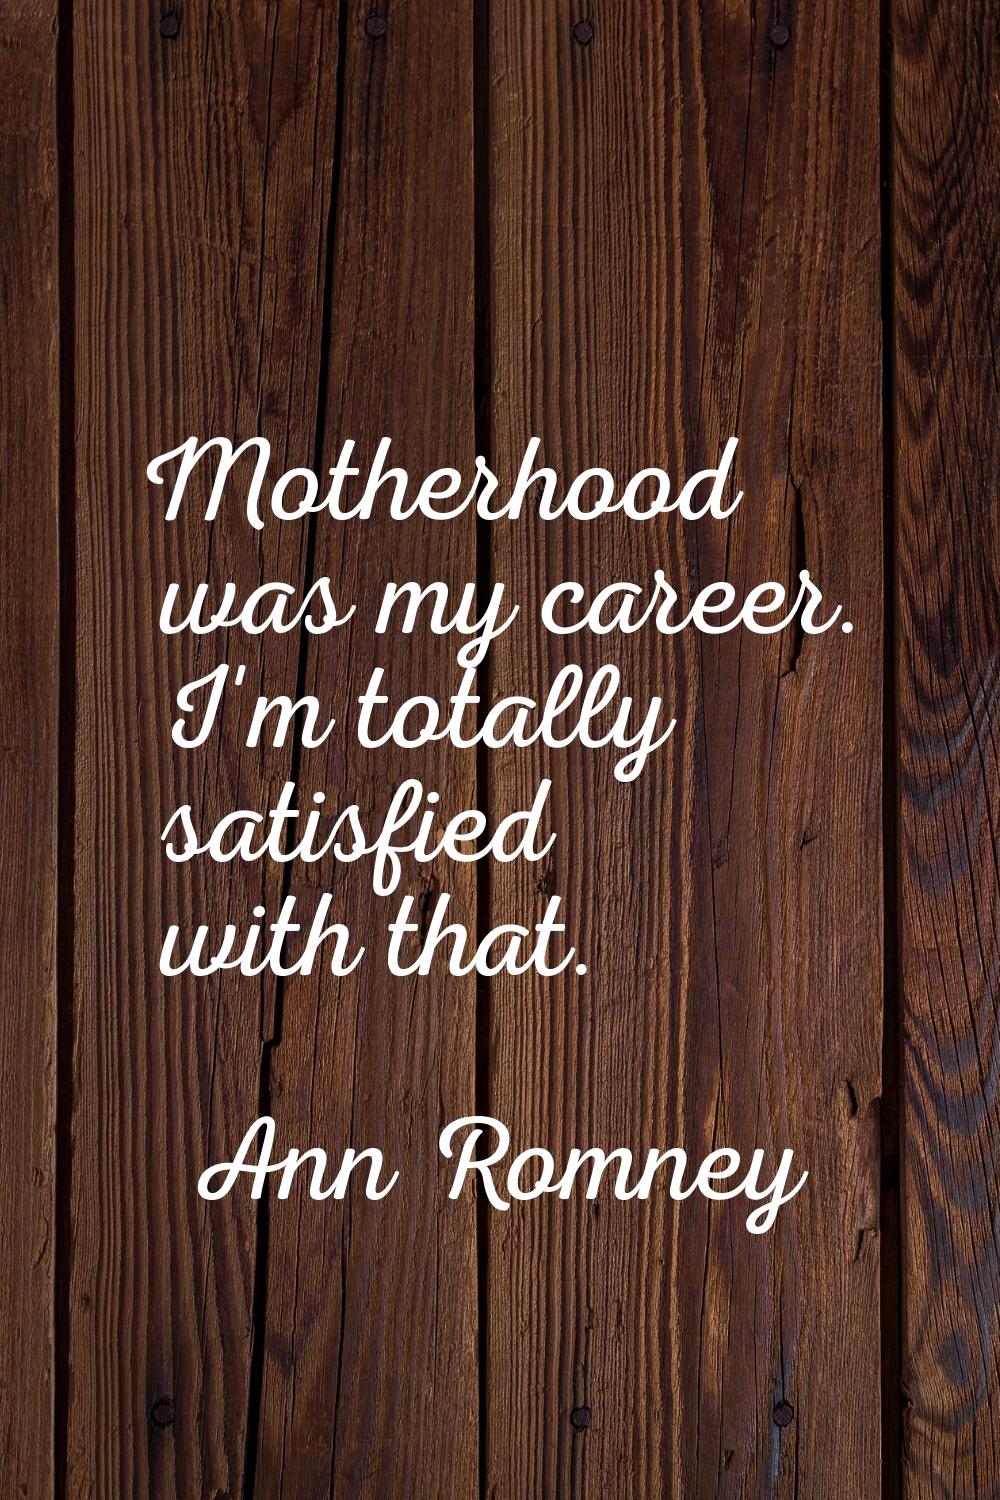 Motherhood was my career. I'm totally satisfied with that.